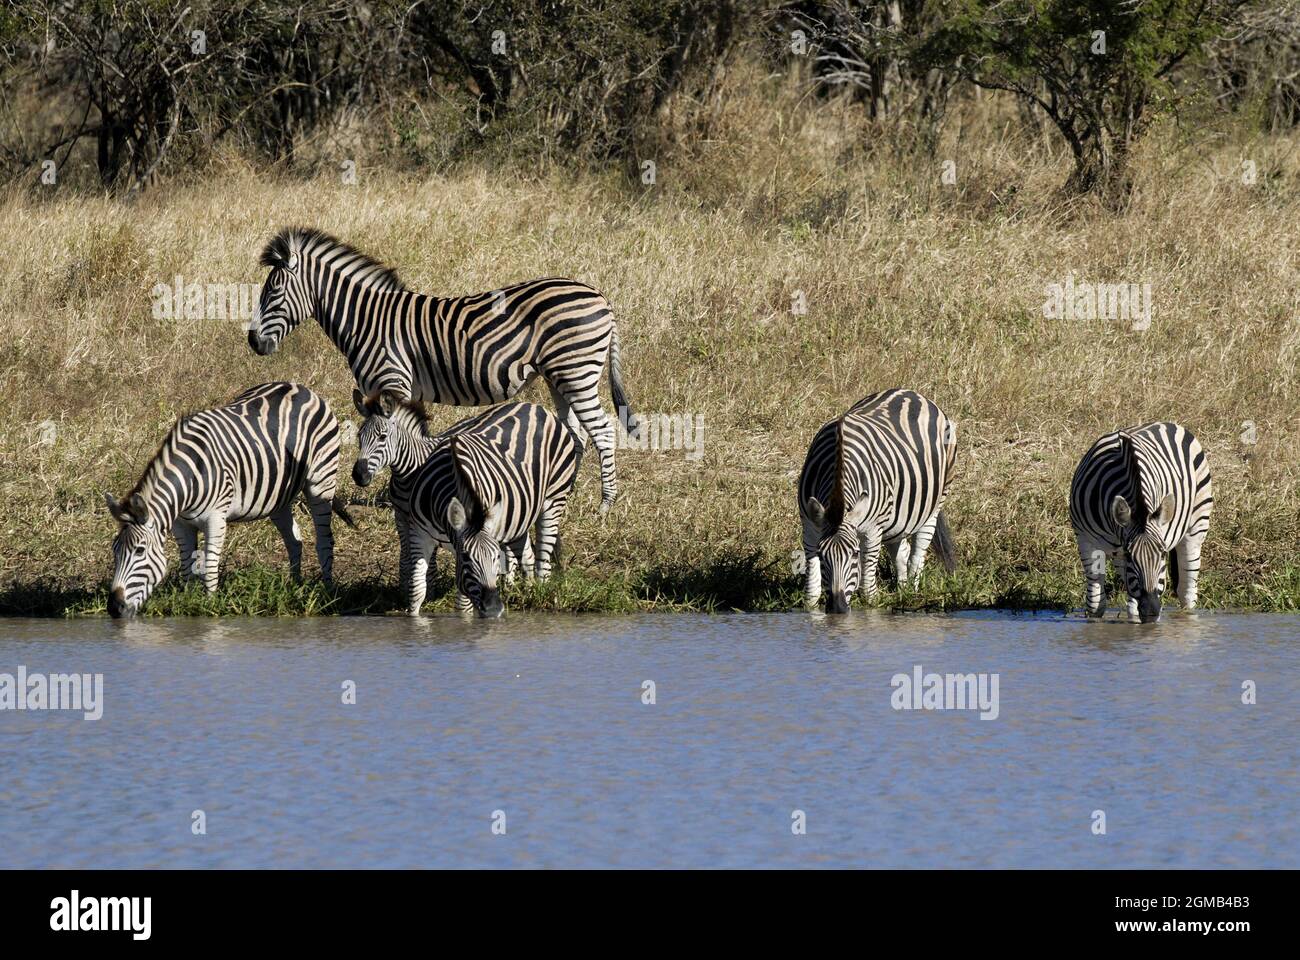 Zebra in Savannah environment, Kruger National Park, South Africa. Stock Photo